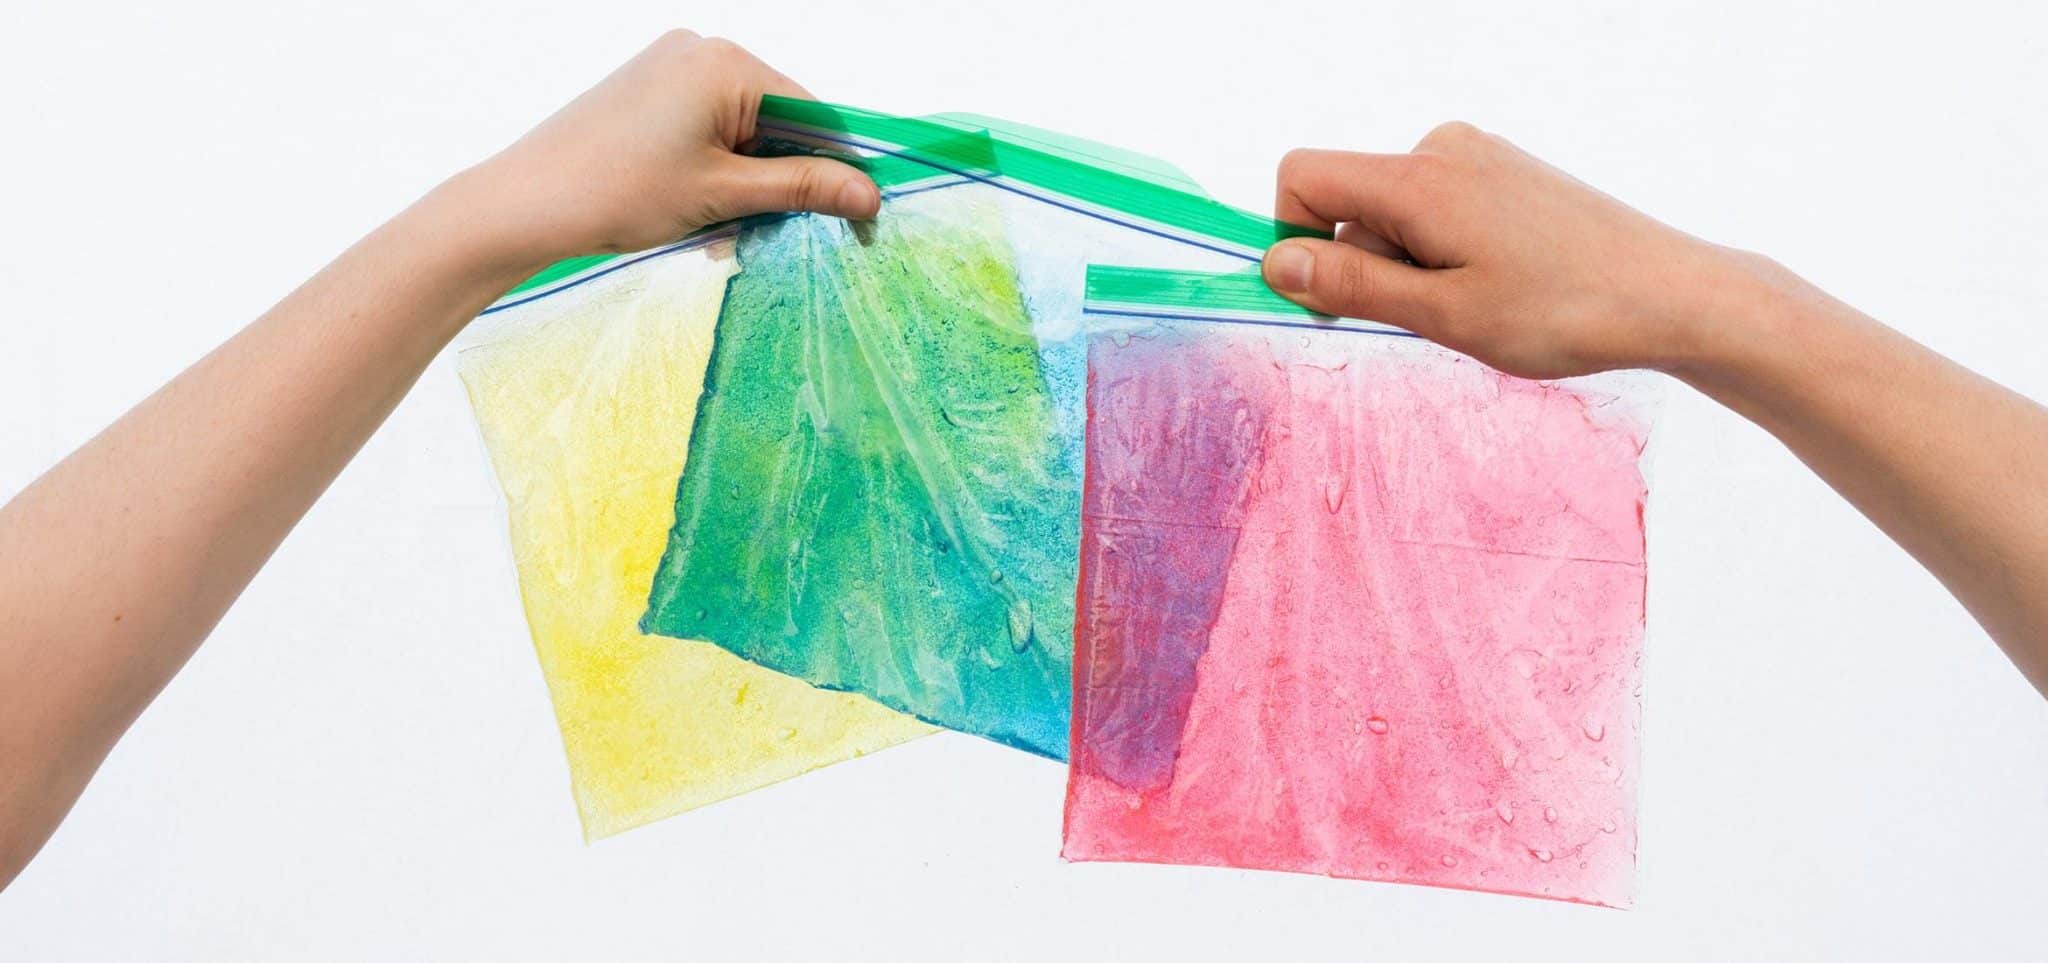 Two hands holding colored paper bags, sealed in a Ziploc bag.